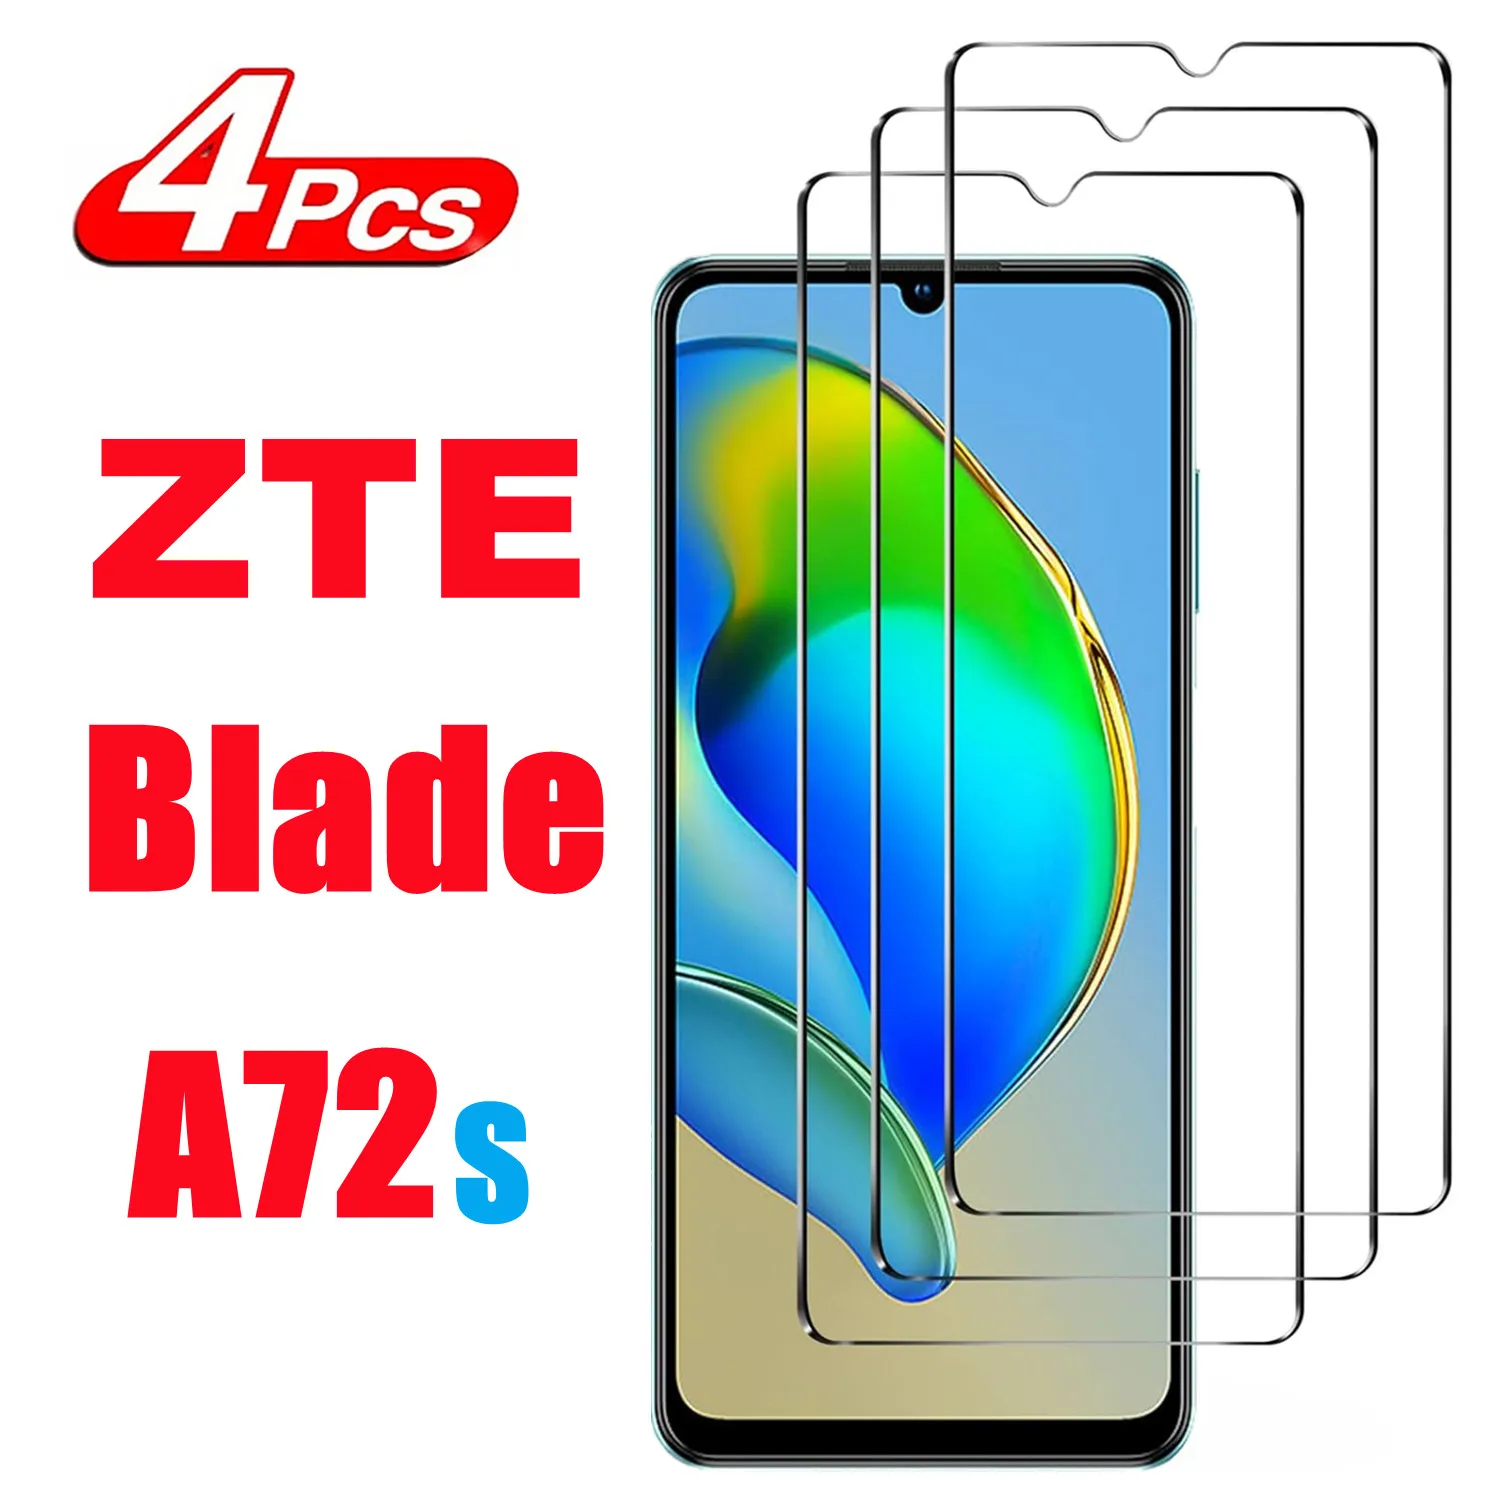 2pcs for zte blade v10 vita glass screen protector case full cover tempered glass protective 9h 2 5d glass film zte blade v10 2/4 Pcs For ZTE Blade A72s 9H Tempered Glass For ZTE Blade A72s Screen Protector Glass Film